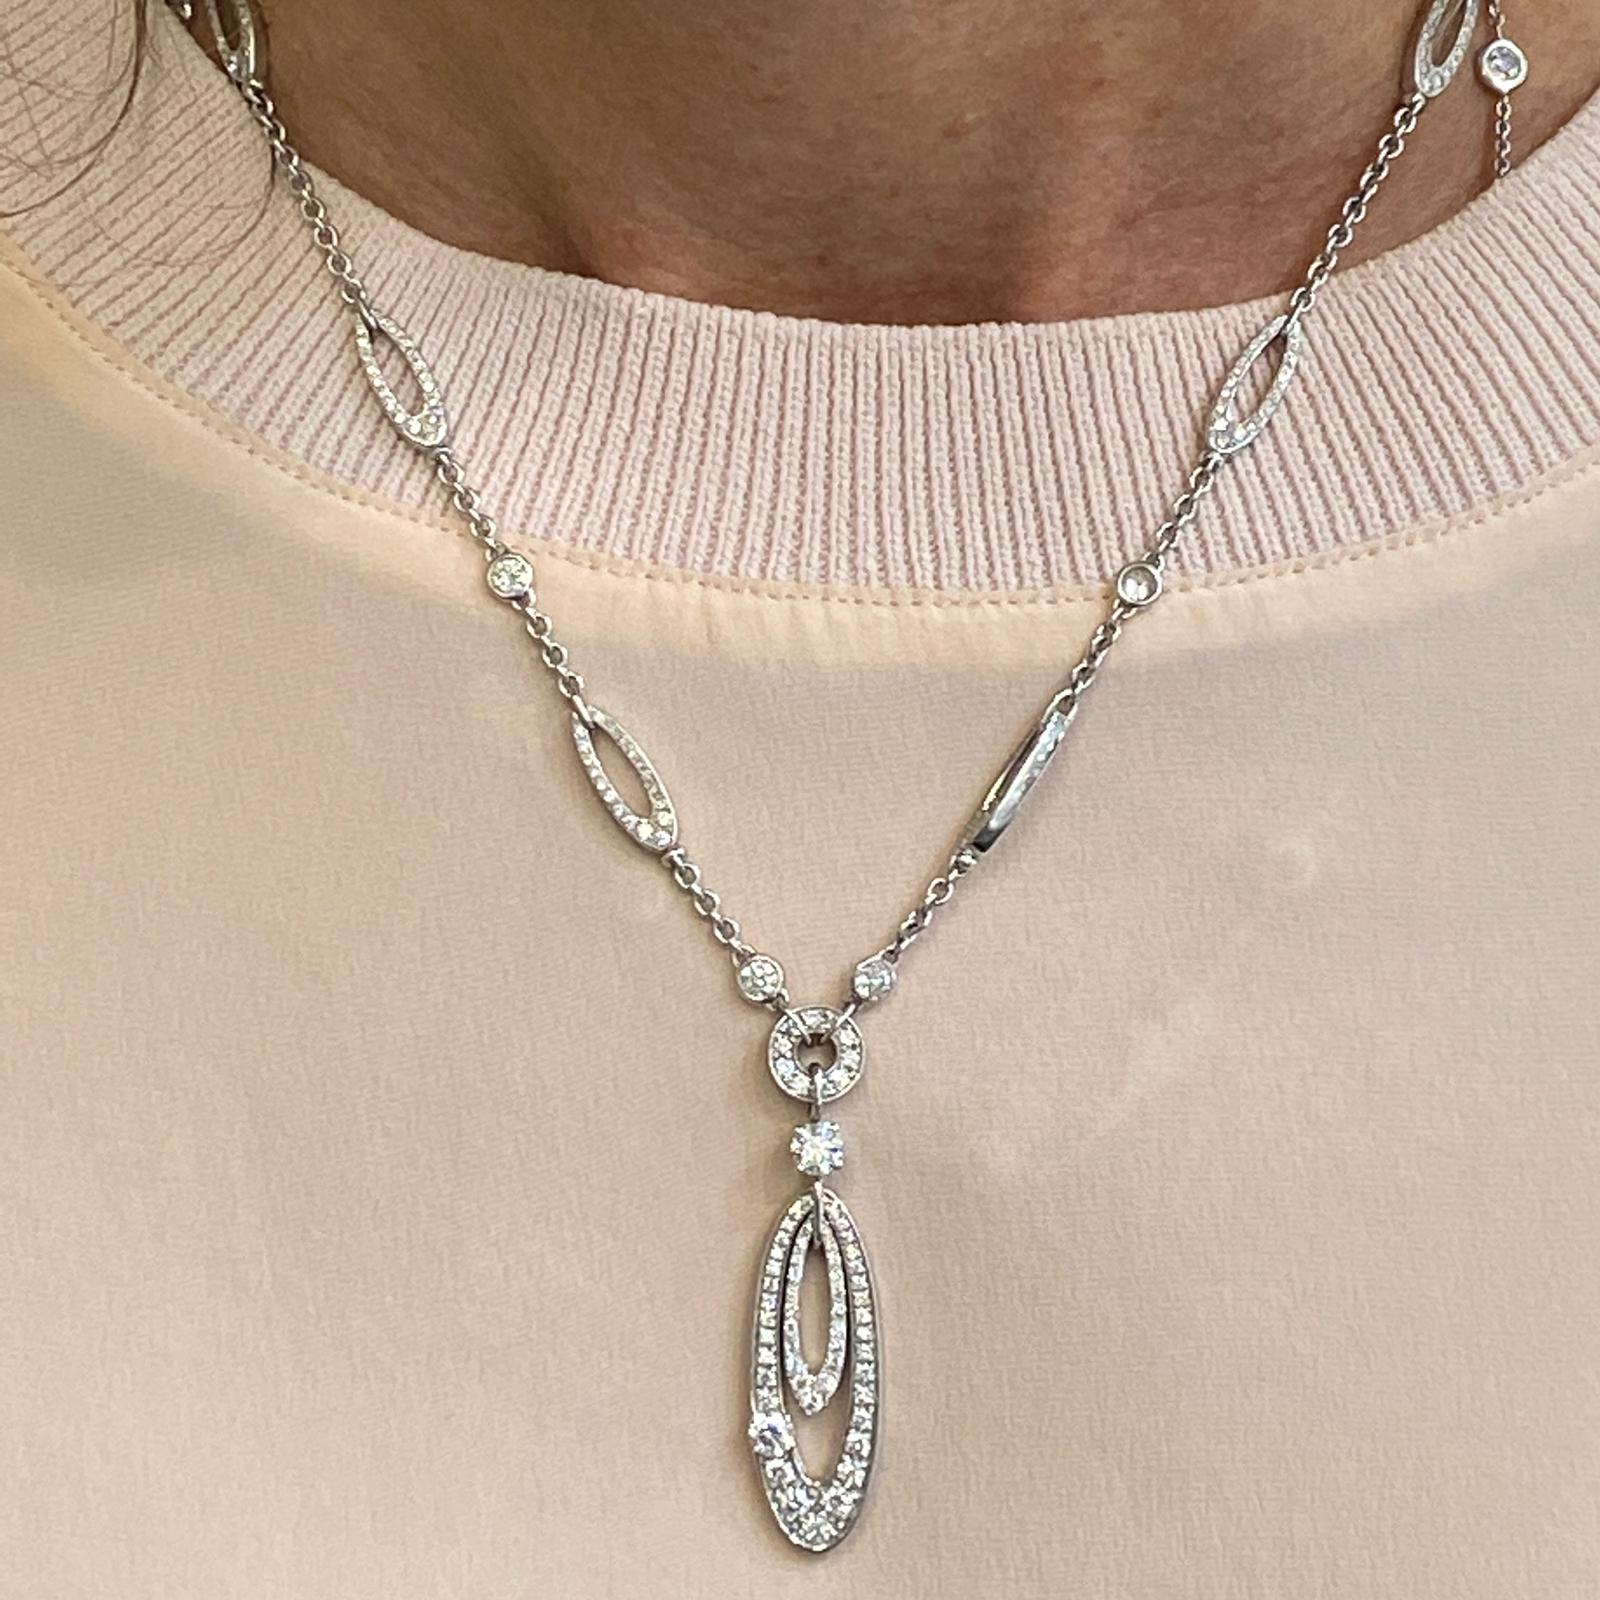 The Bvlgari “Elisia” necklace is crafted from 18K white gold and diamonds. The diamonds are graded F color and VS clarity and amount to approximately 4.00 carats total weight.  The chain is 17.00” long and features a lobster claw closure.